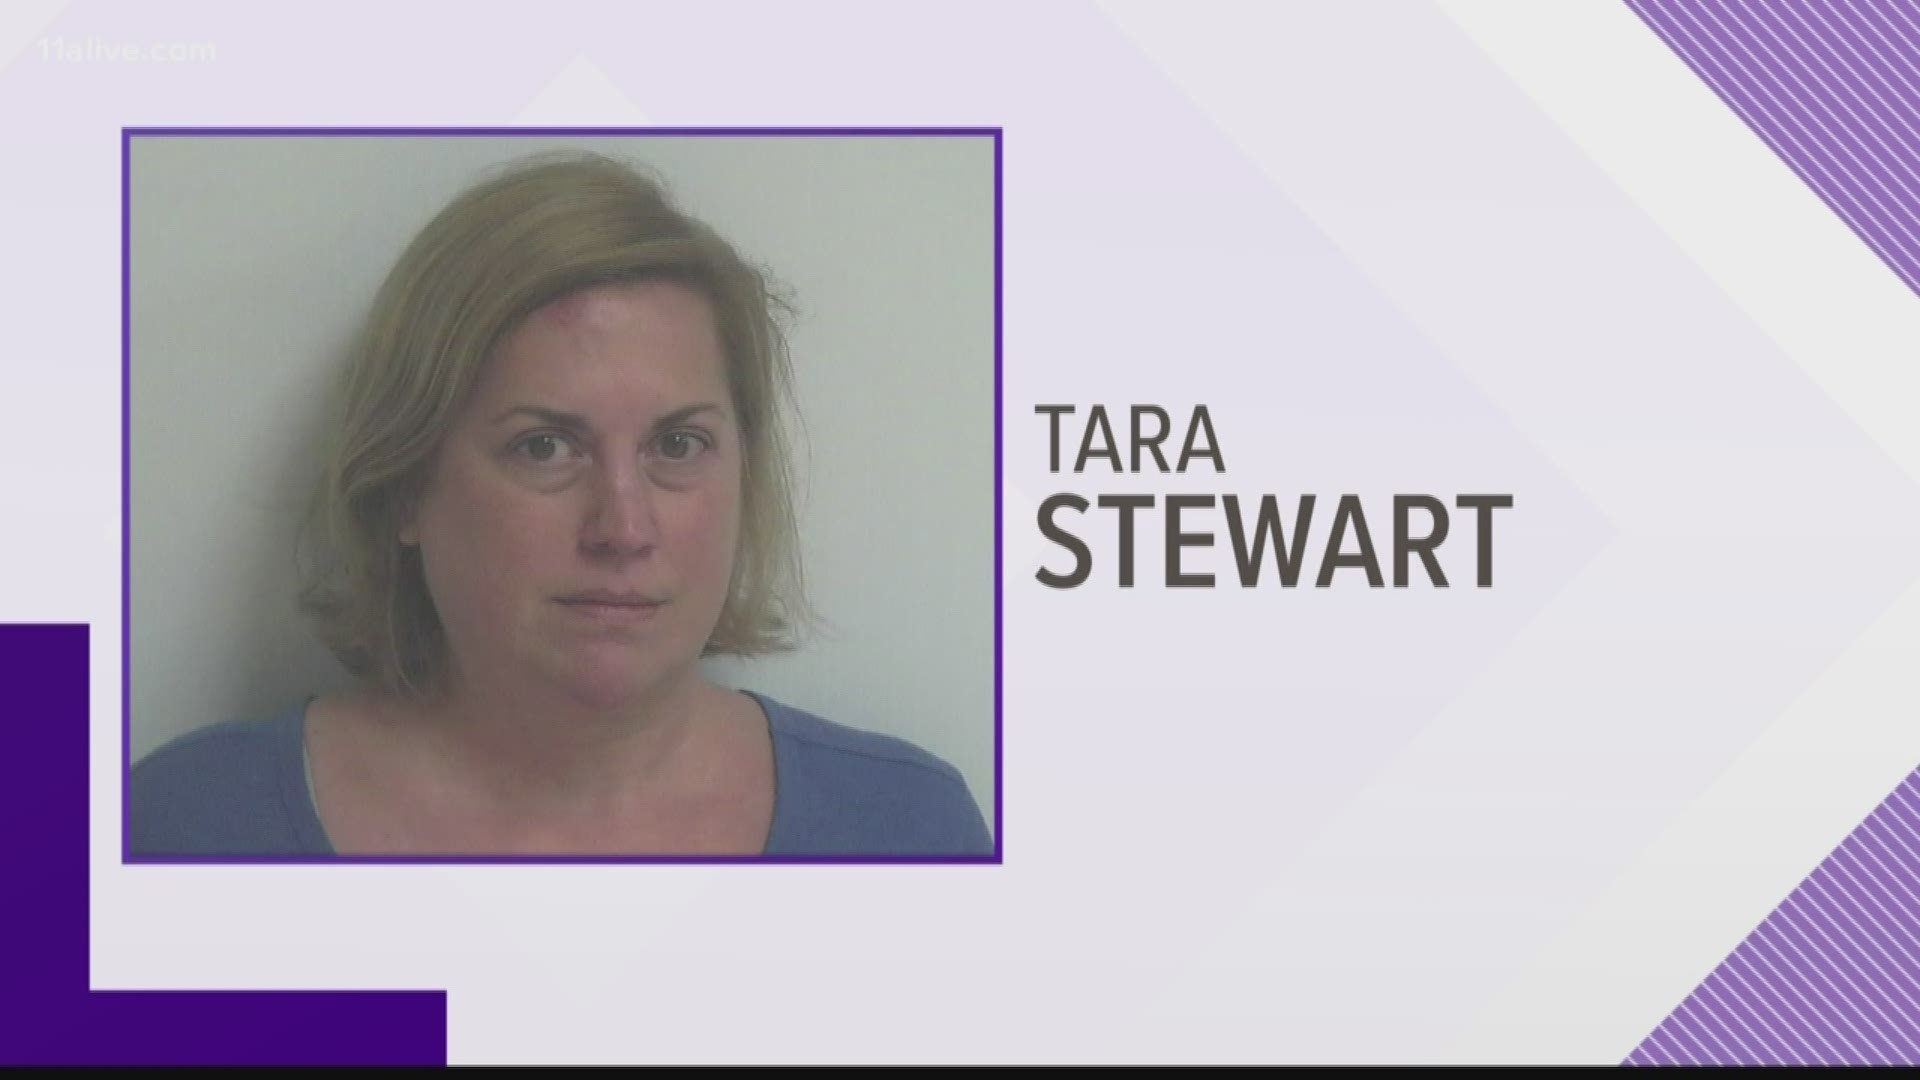 Tara Stewart was investigated by the Walton County Sheriff's Office and later resigned following a public drunkenness arrest in front of the school.